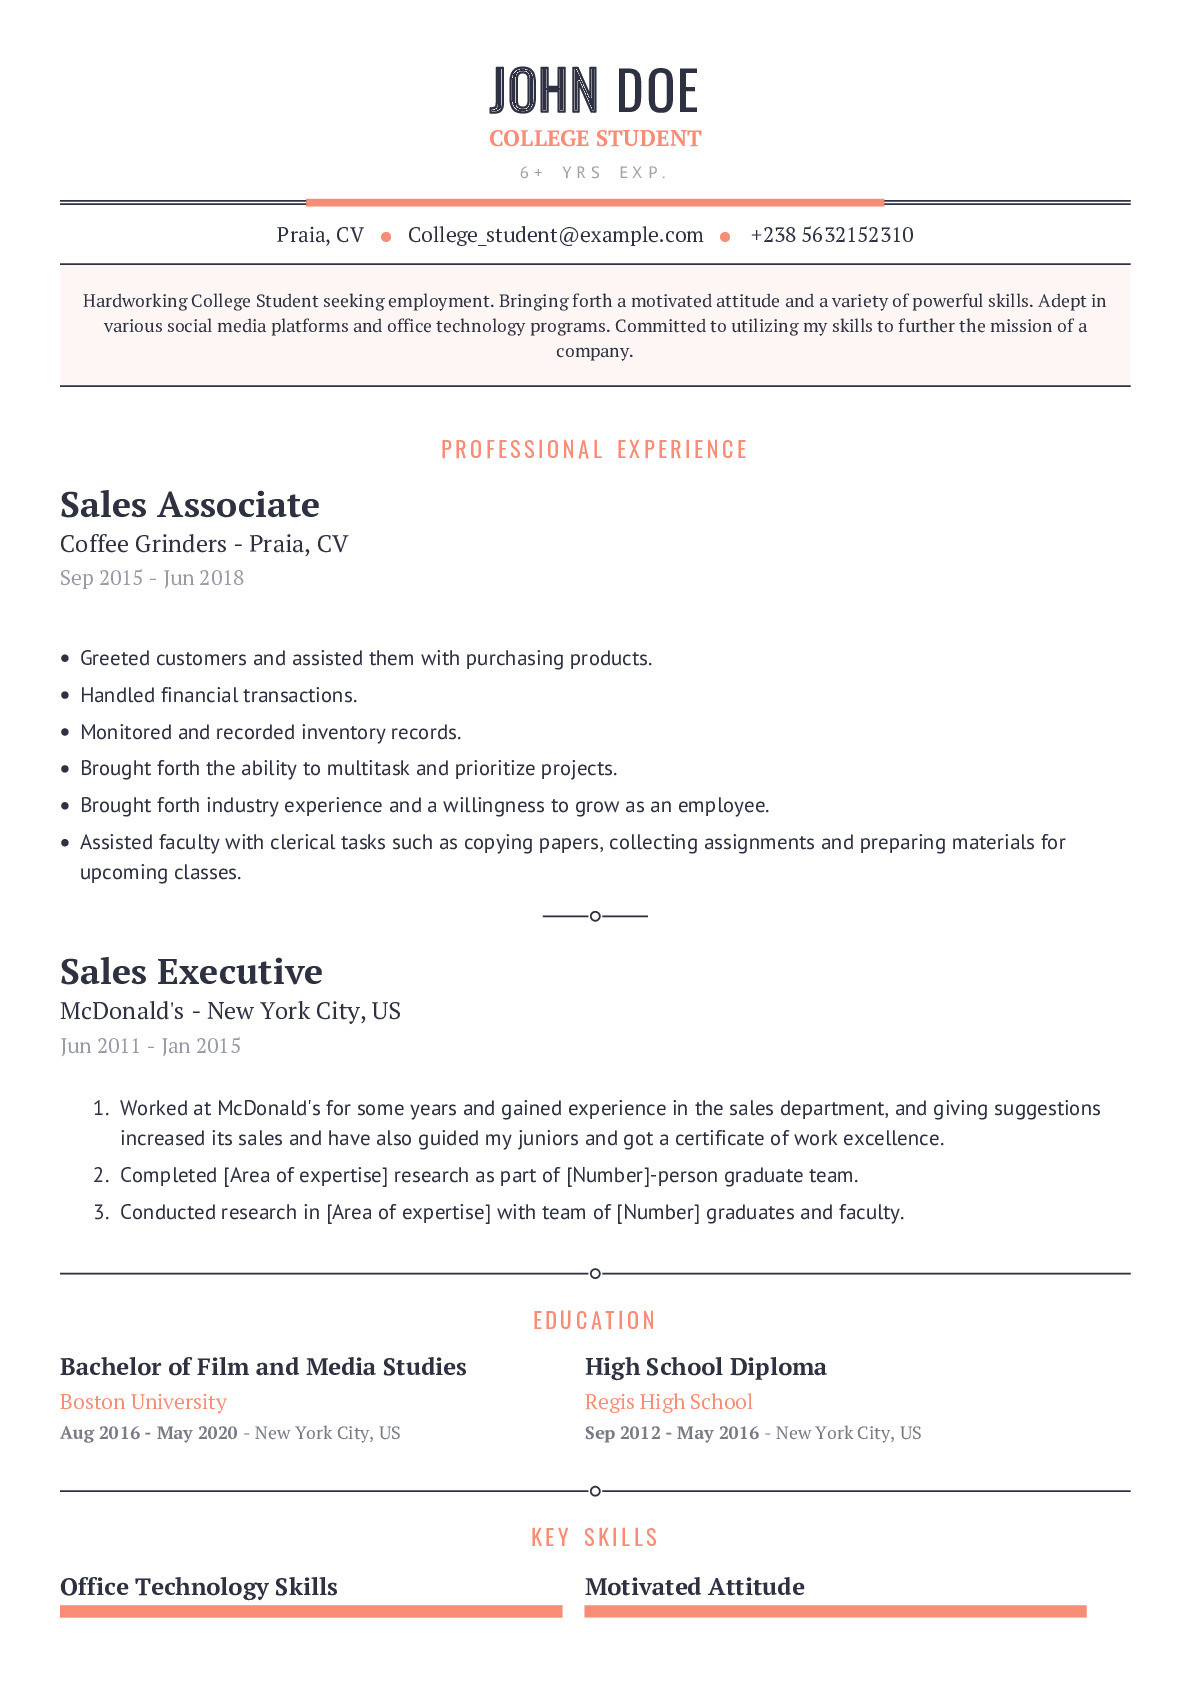 Sample Summary for College Student Resume College Student Resume Example with Content Sample Craftmycv